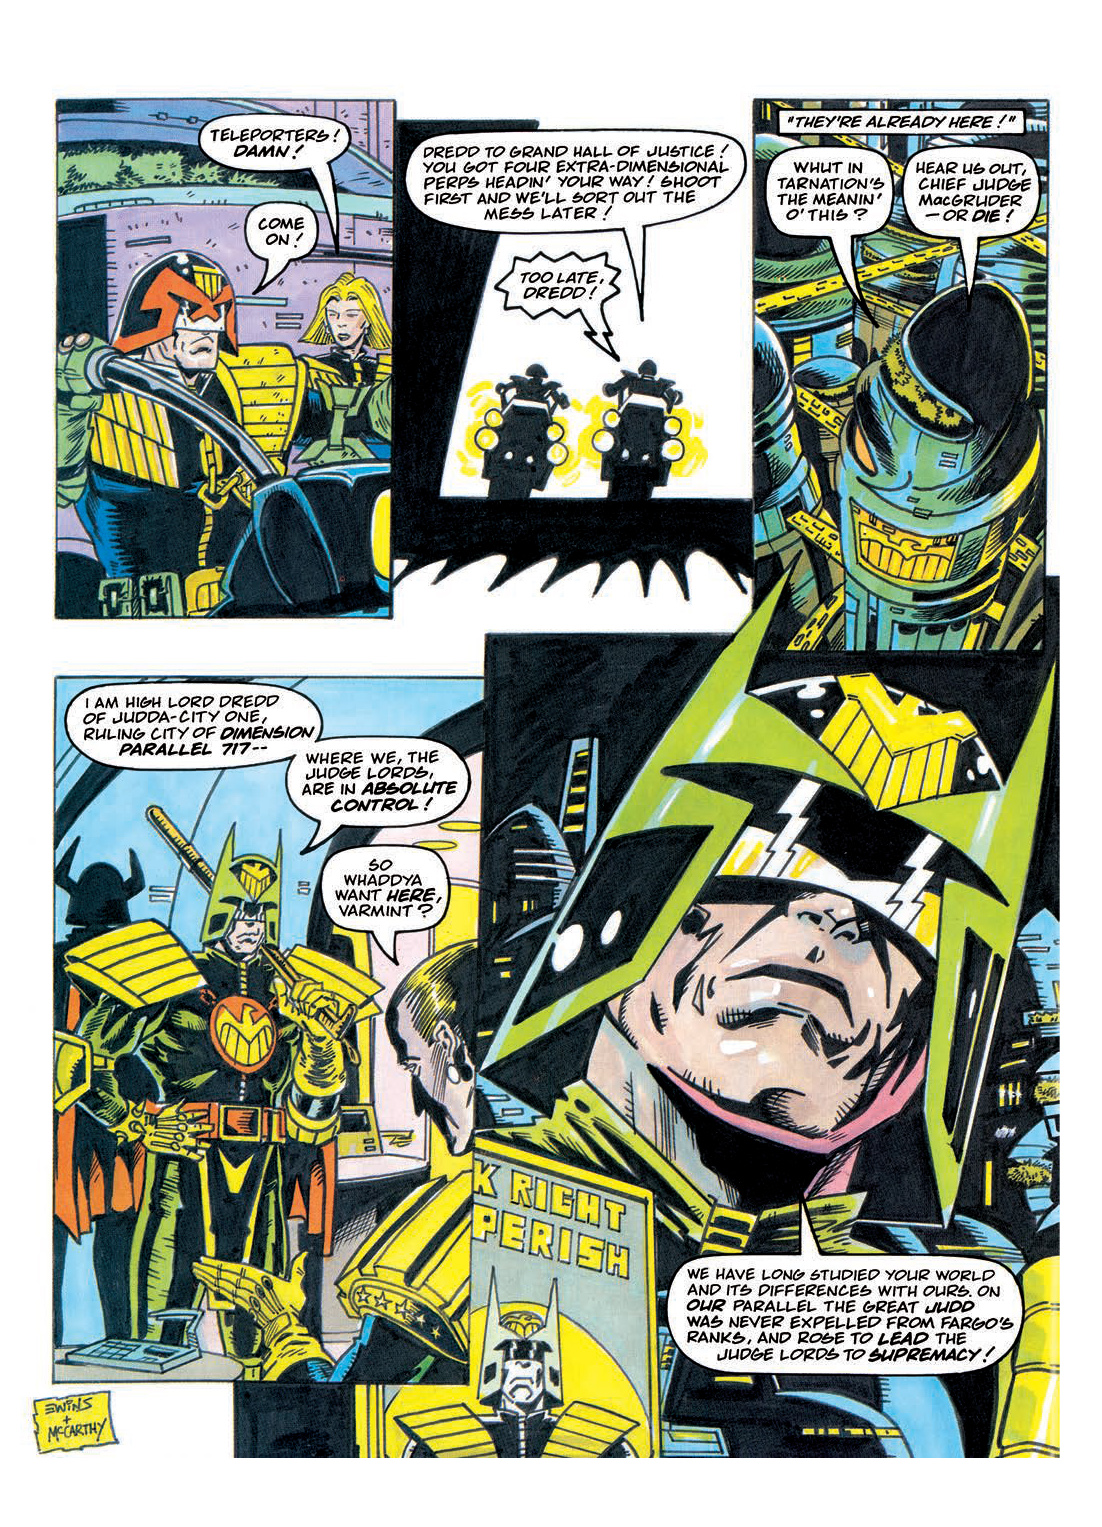 Read online Judge Dredd: The Restricted Files comic -  Issue # TPB 3 - 195